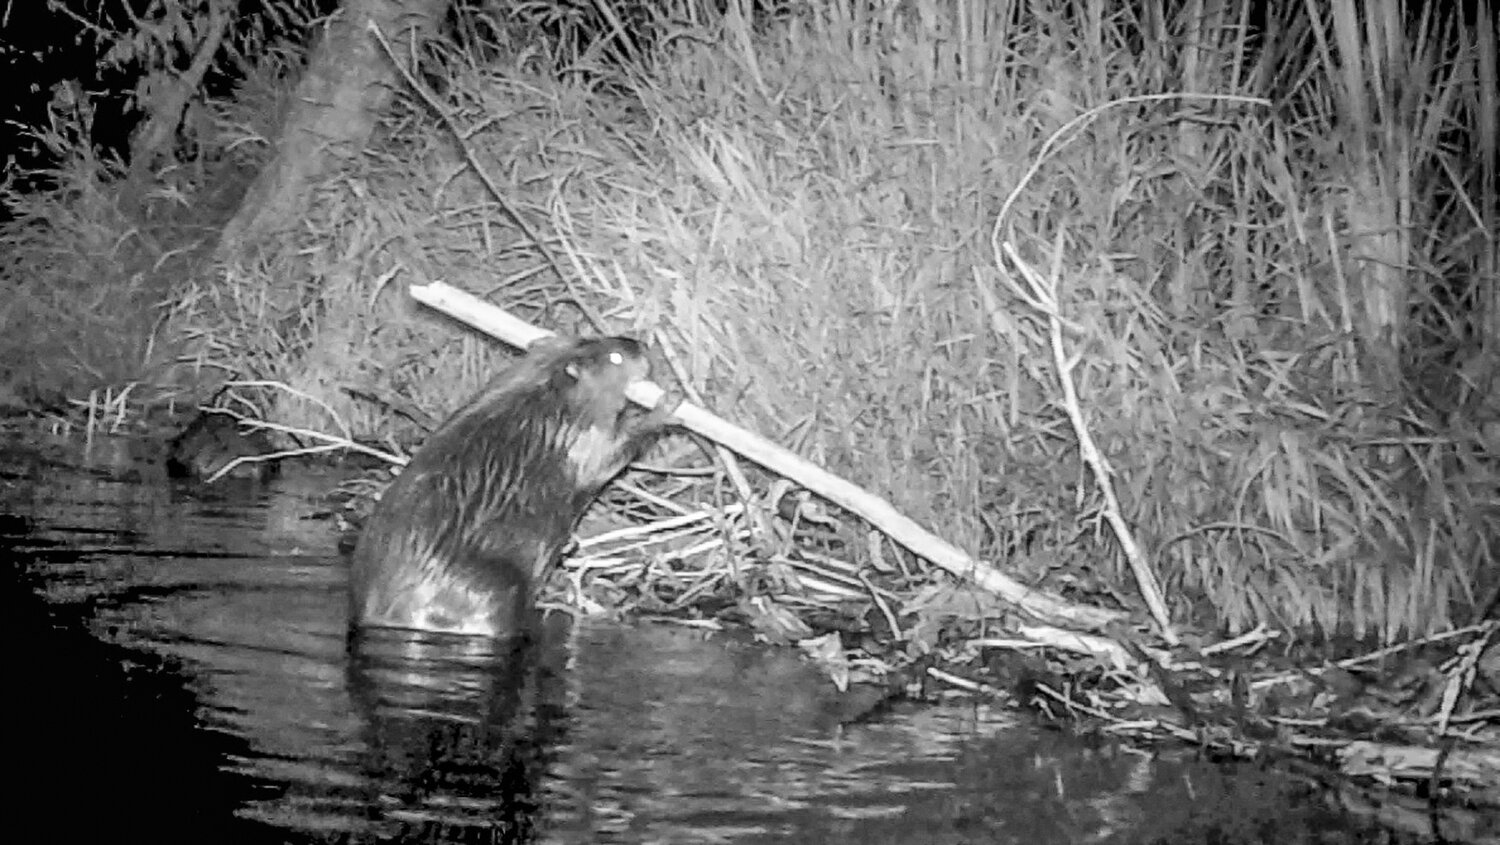 Beavers use deciduous trees as building materials and the tree’s leaves, inner bark and twigs as a source of food.